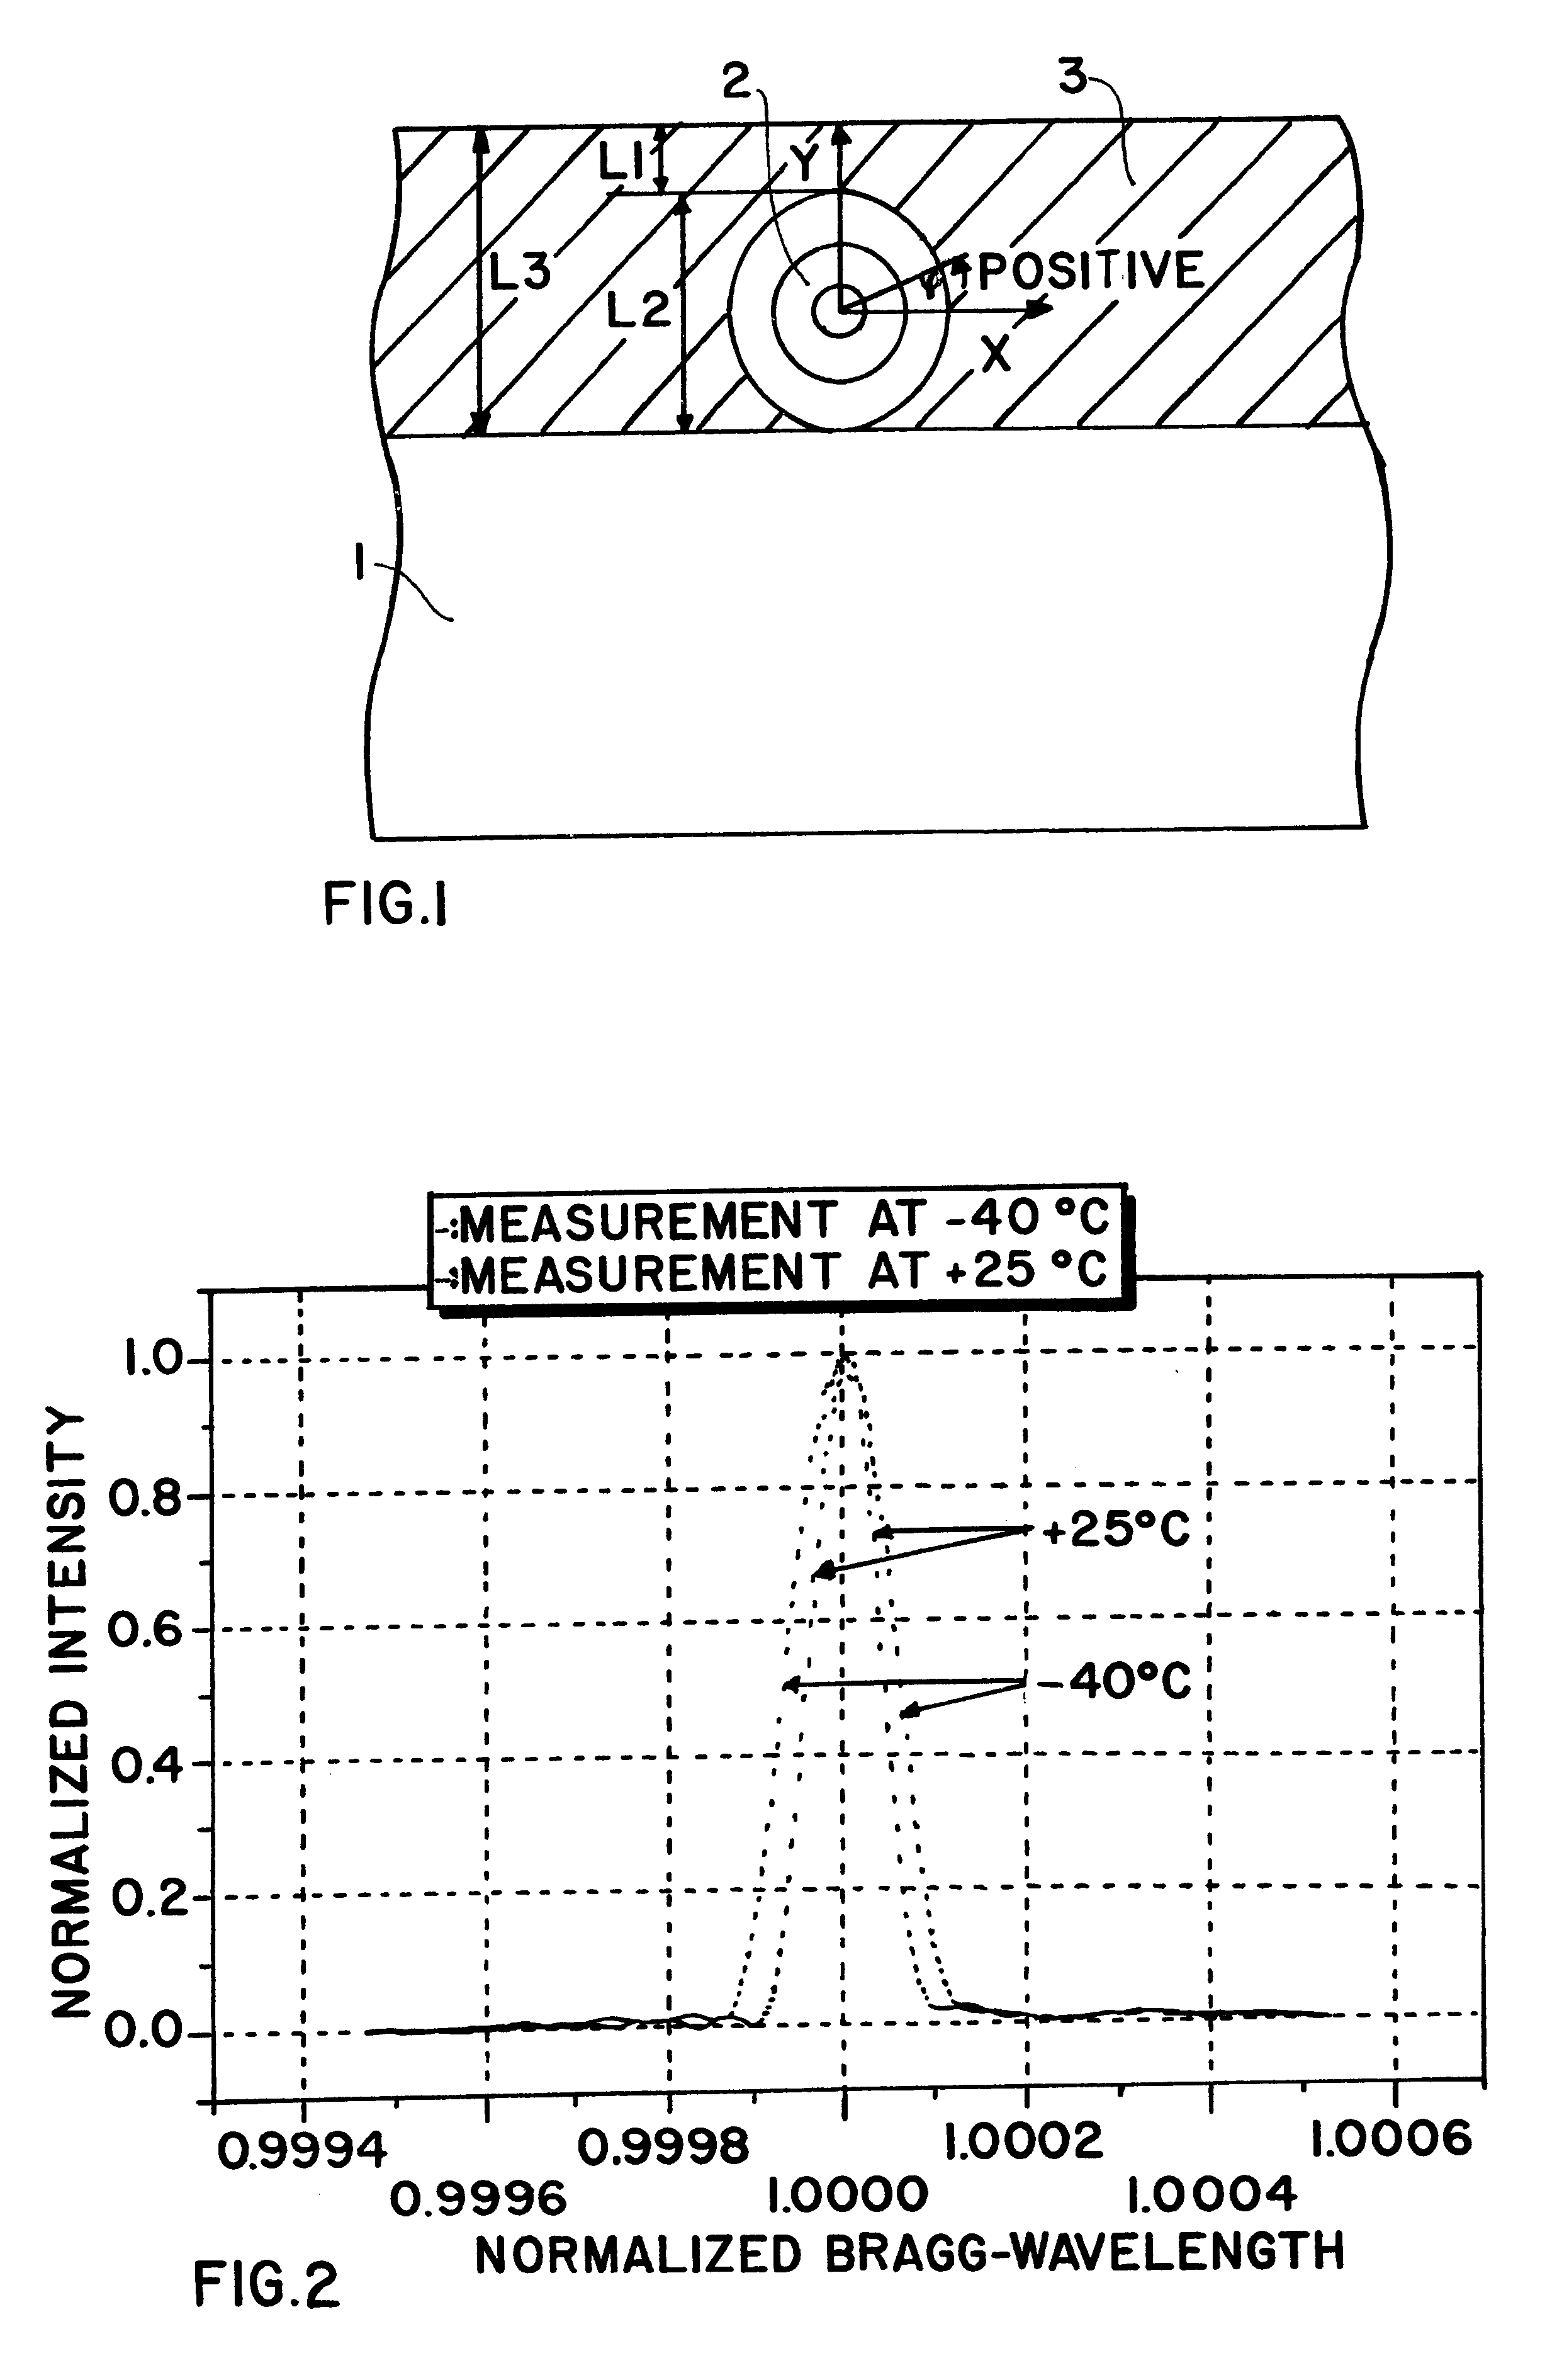 Method and sensor arrangement for measuring temperature and strain using an optical fiber embedded in a cover layer on a substrate